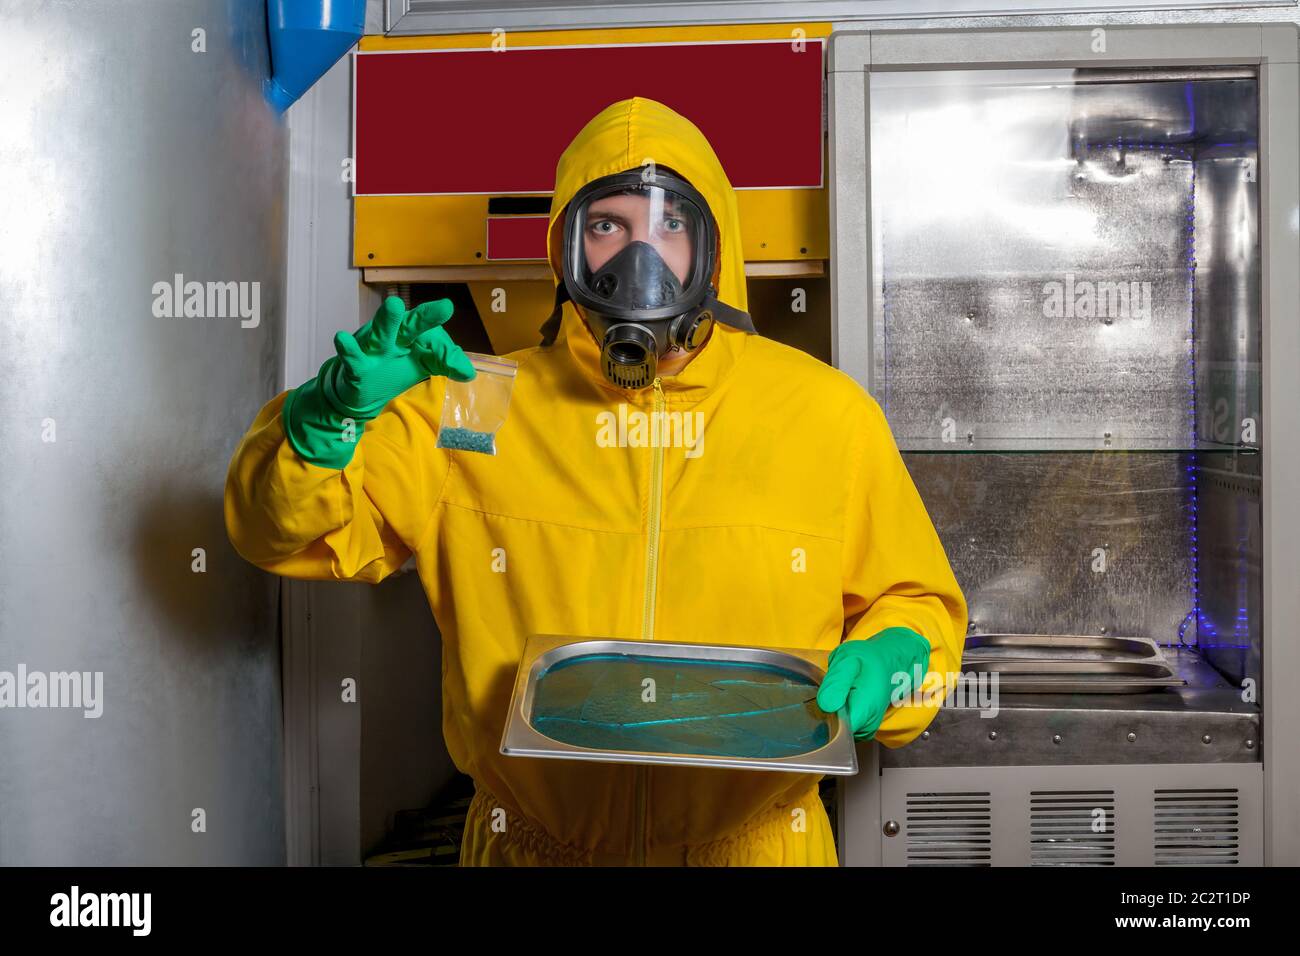 Man in protective outerwear suit sorts crystal meth in packs Stock Photo